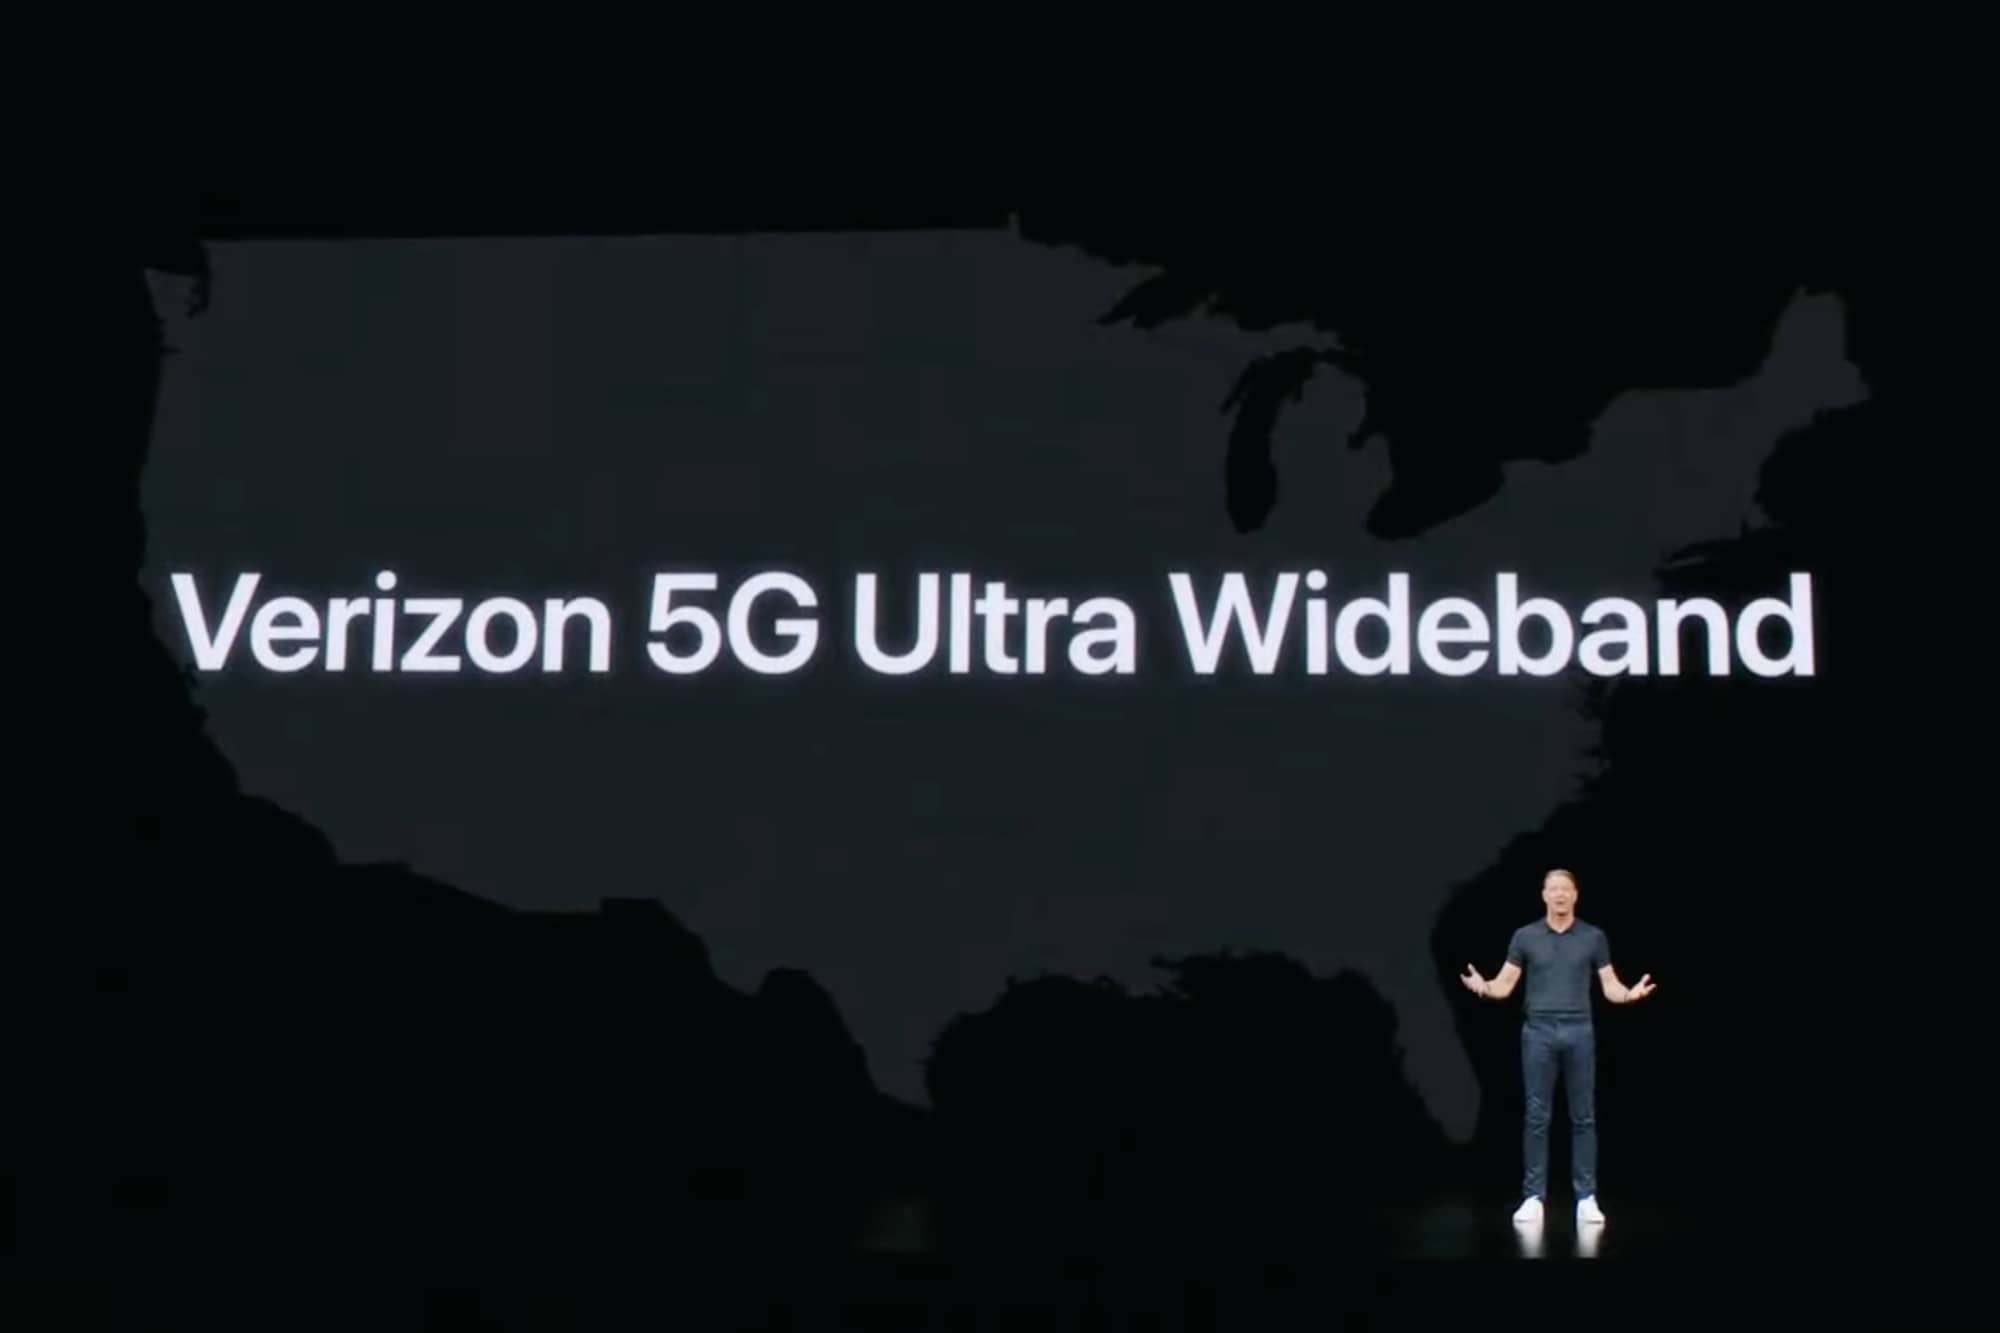 Verizon CEO Hans Vestberg on stage announcing 5G Ultra Wideband.